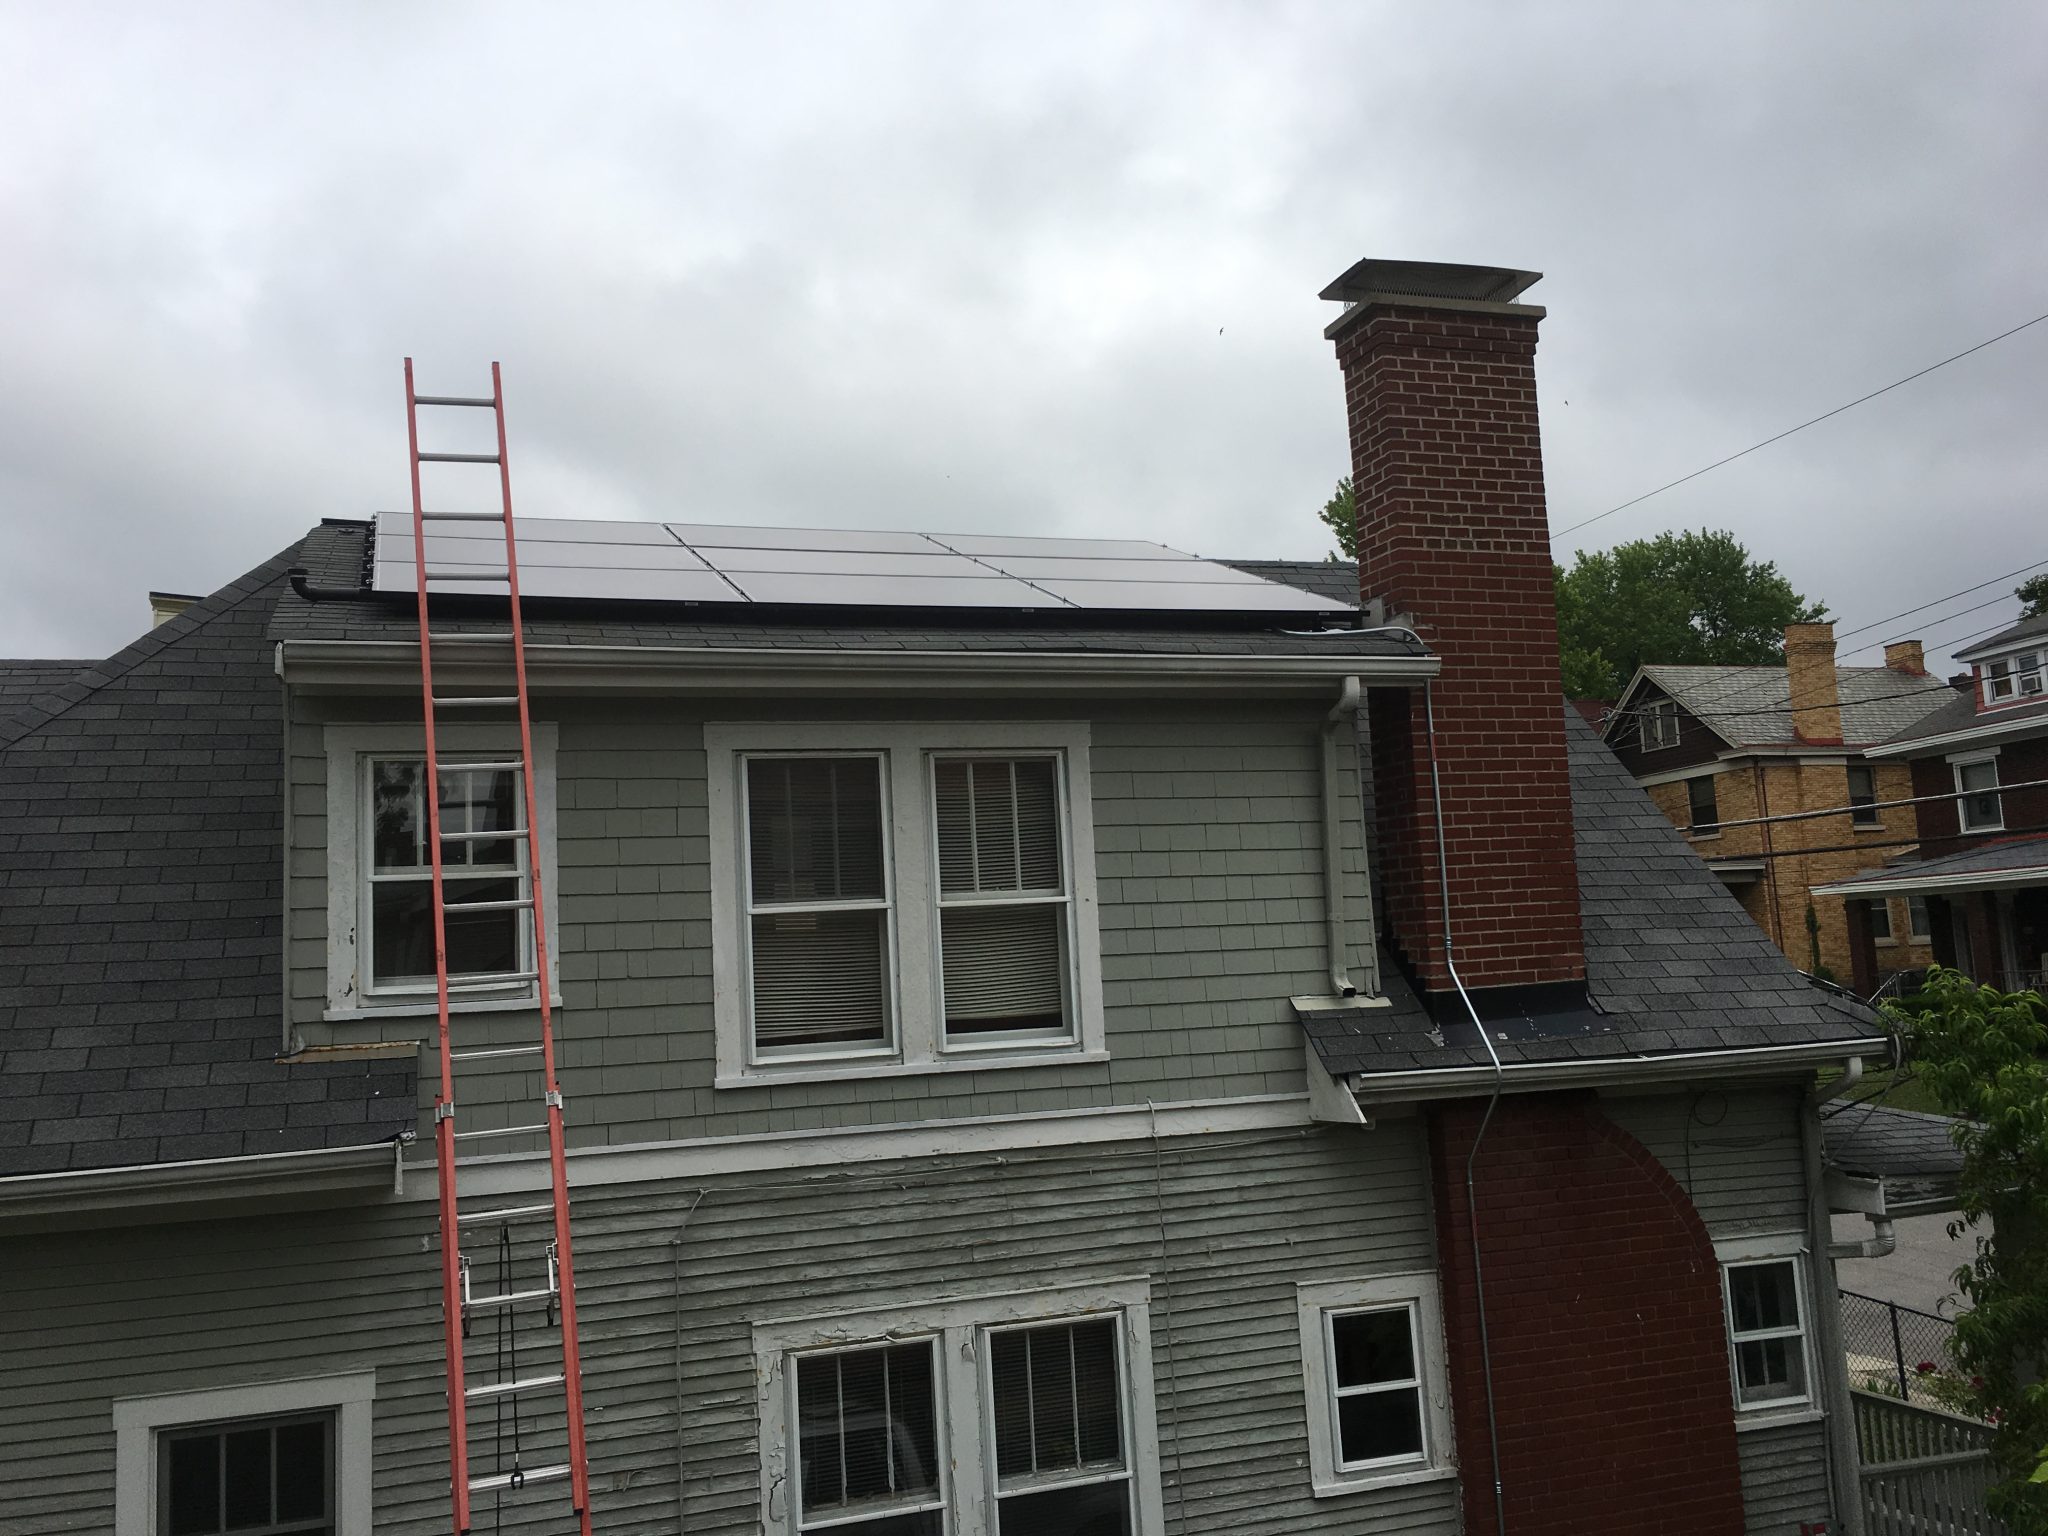 Can solar work well for my house?